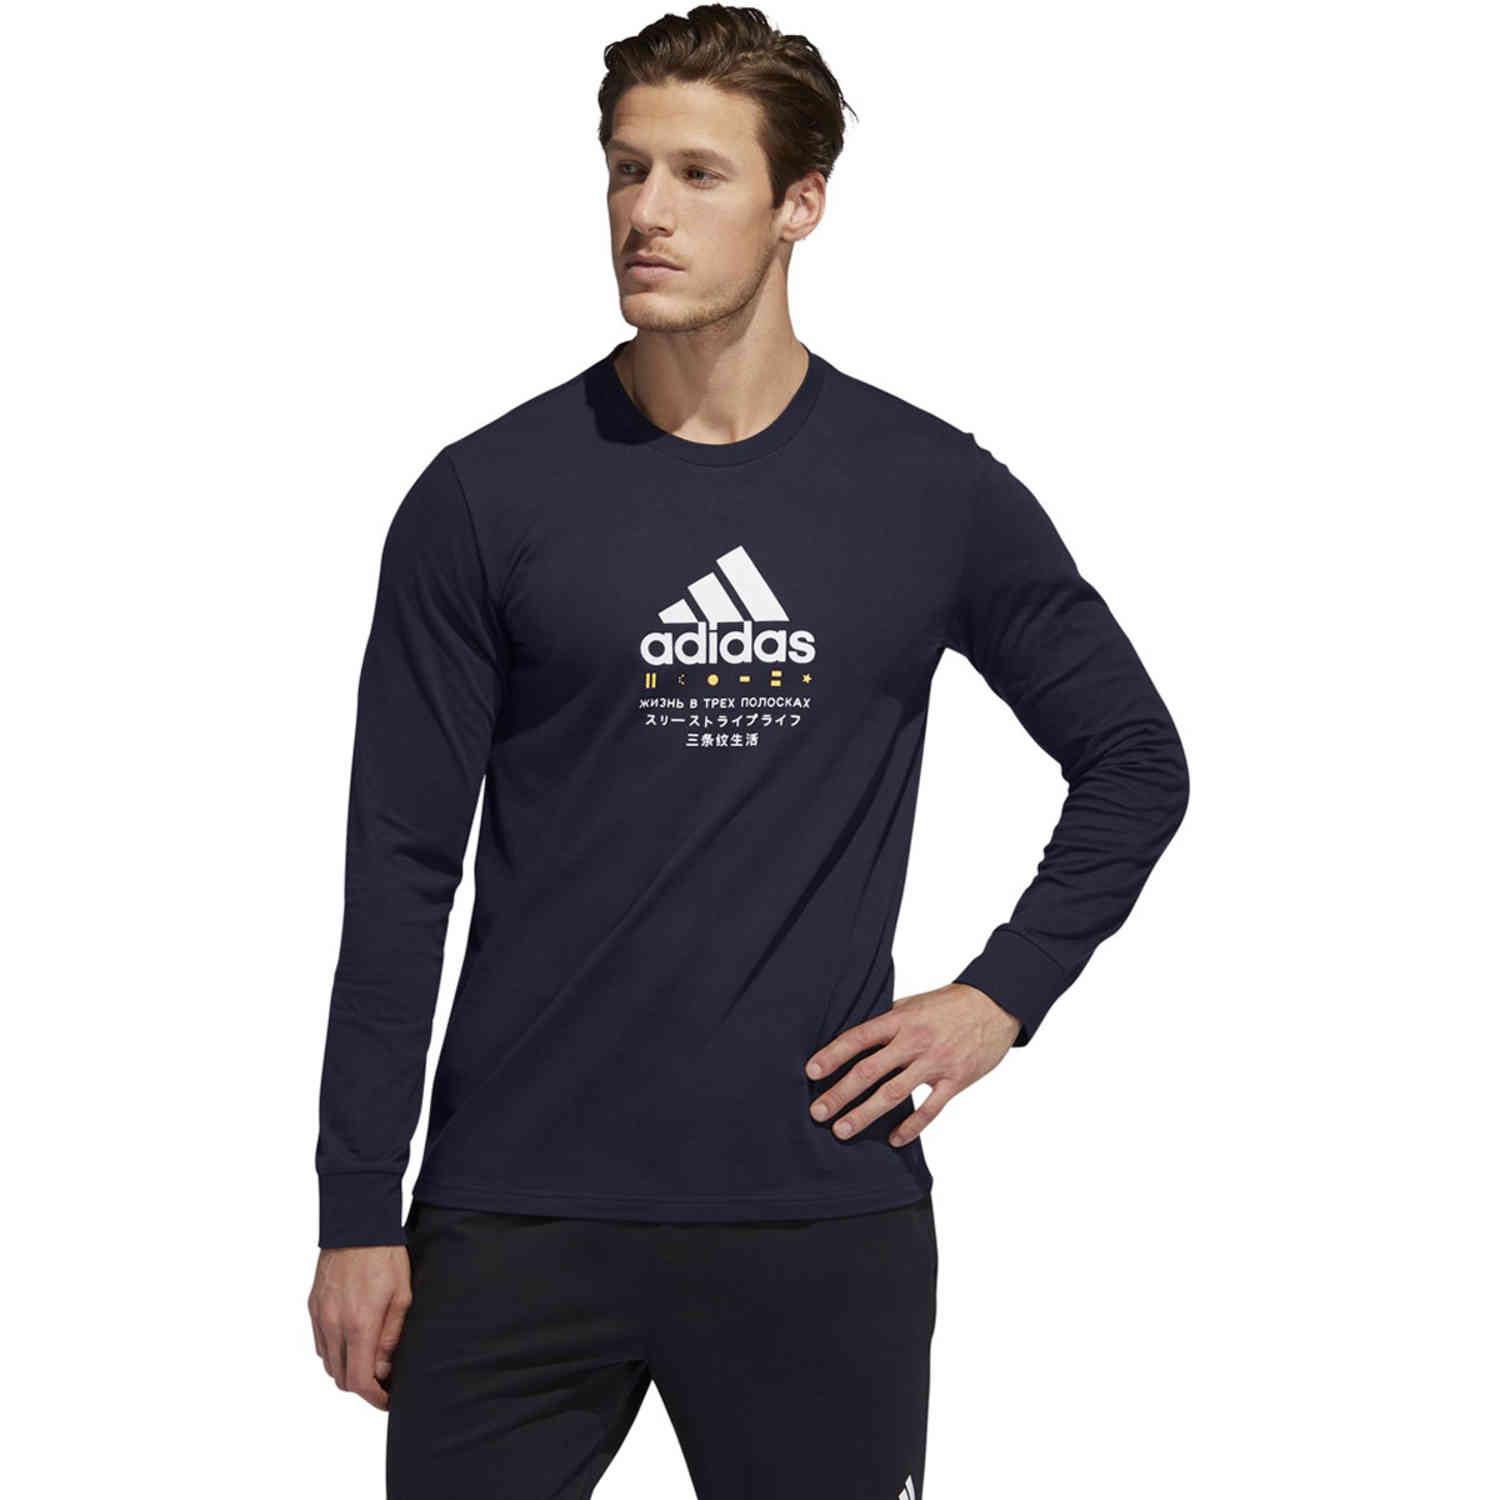 adidas Global Citizens - - Master Soccer L/S Tee Legend Ink Graphic